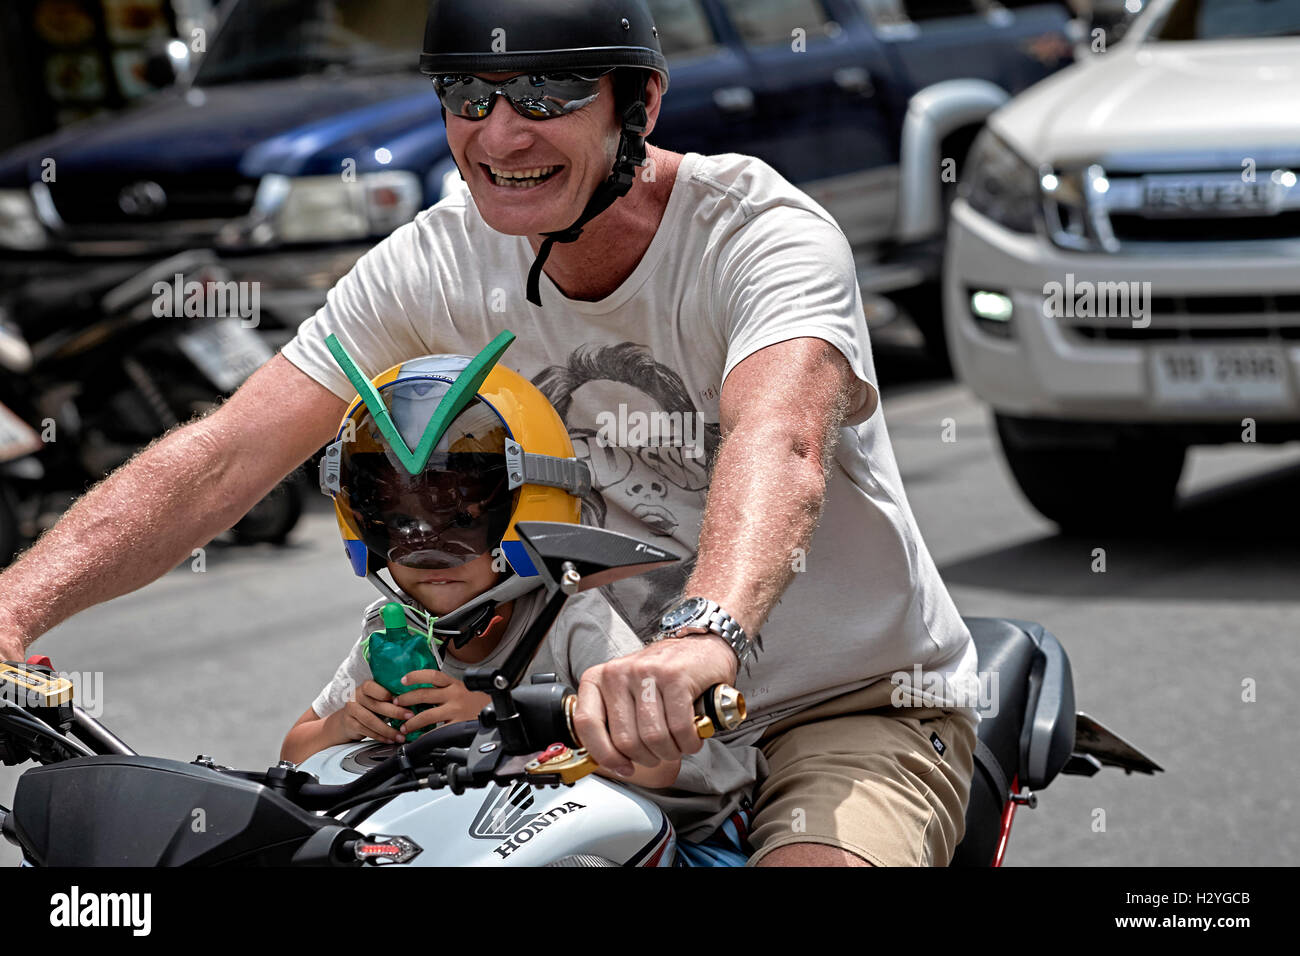 Child motorcycle. Father carrying his young child on a motorbike through traffic. Stock Photo